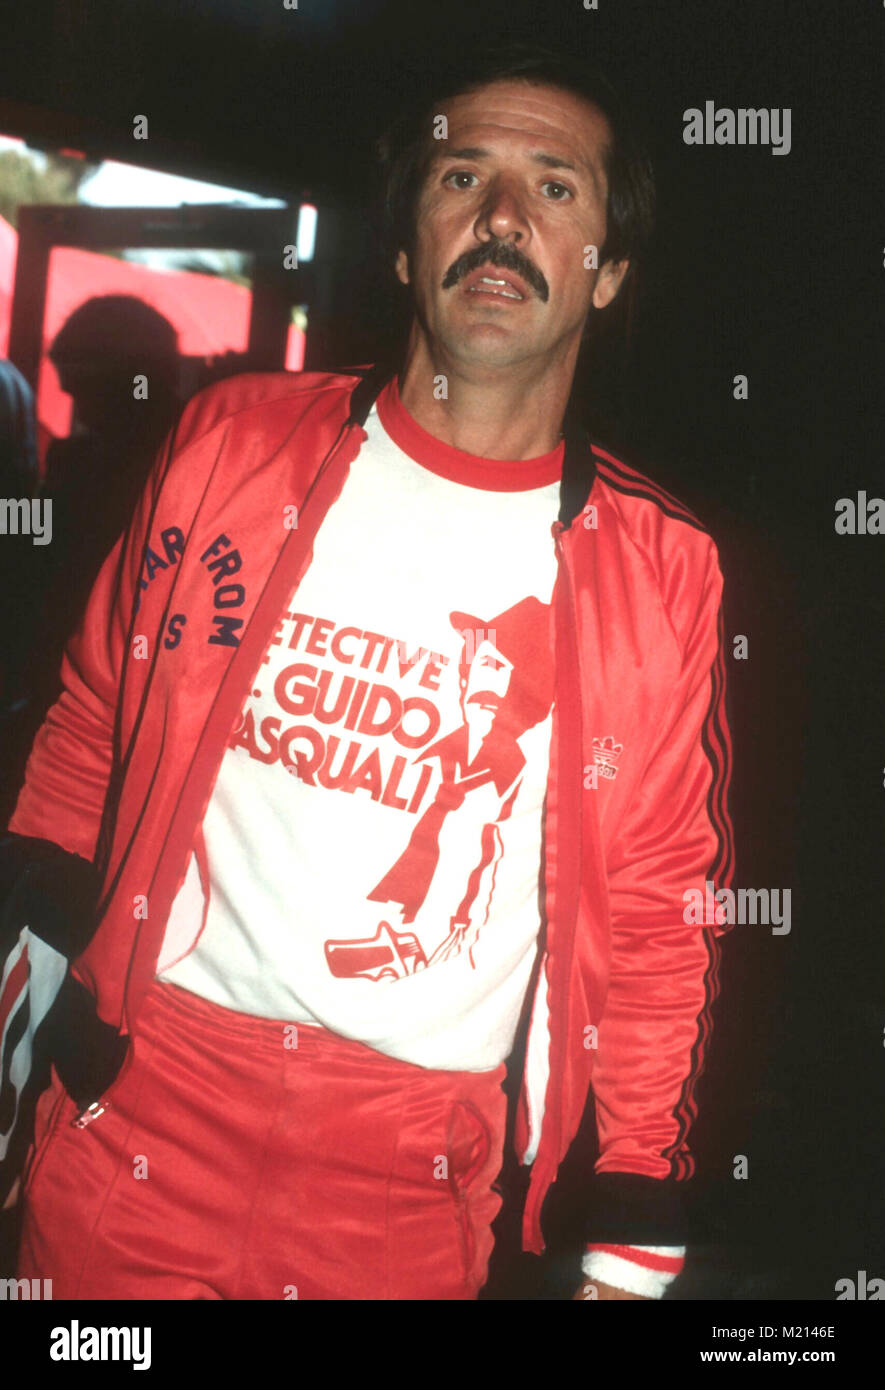 LOS ANGELES, CA - MAY 17: Television personality Sonny Bono attends the Bill Cosby Tennis Invitational tournament on May 16, 1981 in Los Angeles, California. Photo by Barry King/Alamy Stock Photo Stock Photo